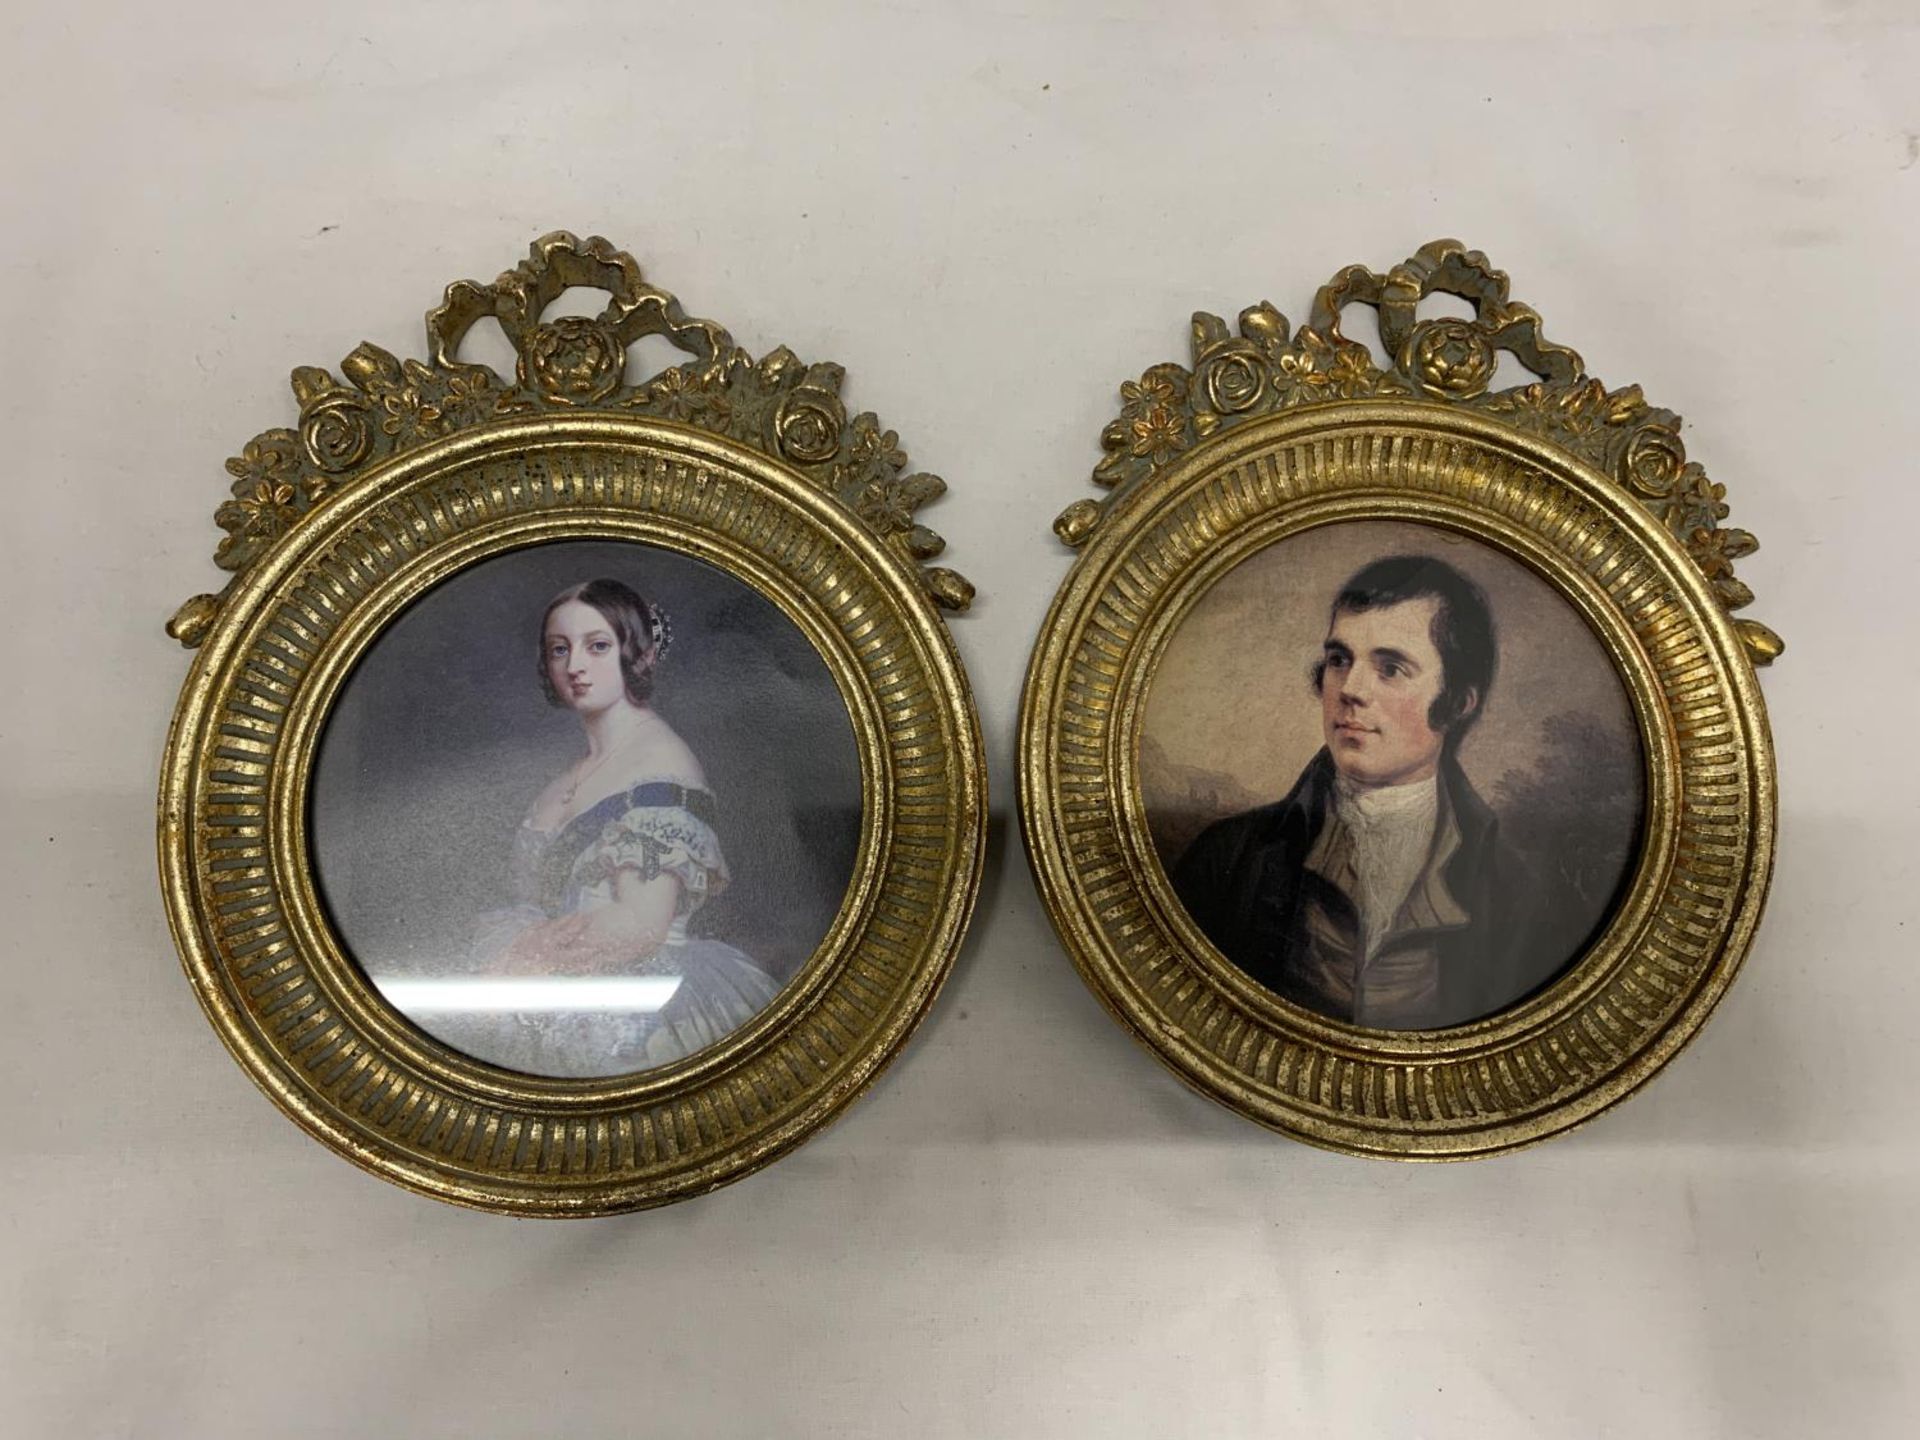 TWO ROUND GILT FRAMED PORTRAIT PRINTS OF A MAN AND A LADY, HEIGHT 24CM